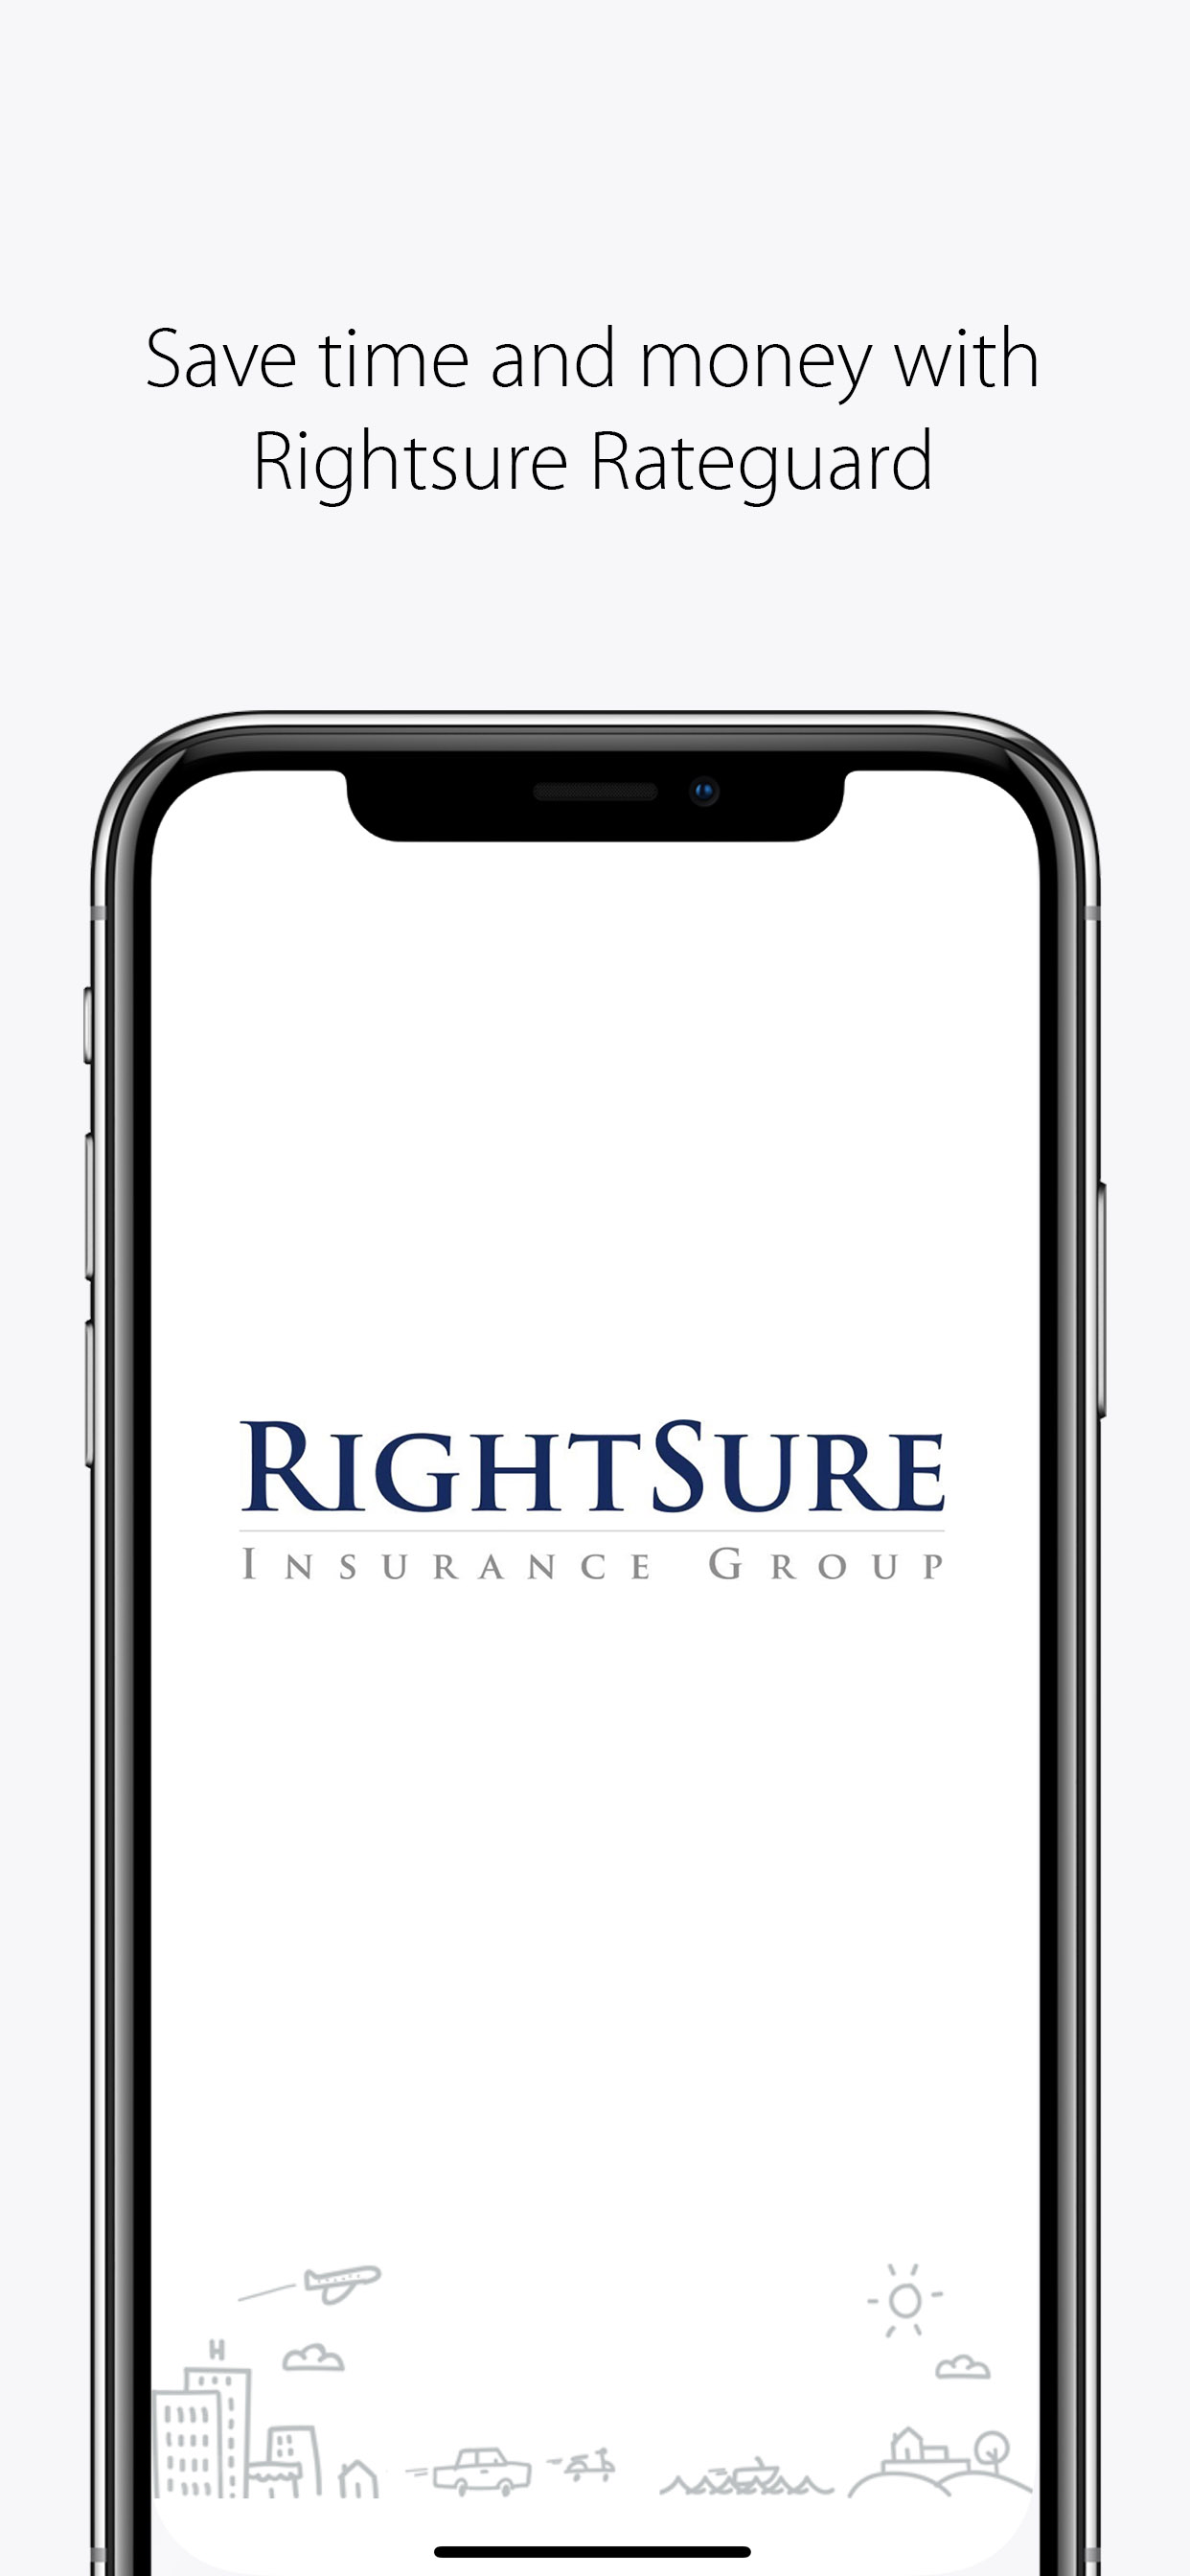 Save time and money with Rightsure Rateguard